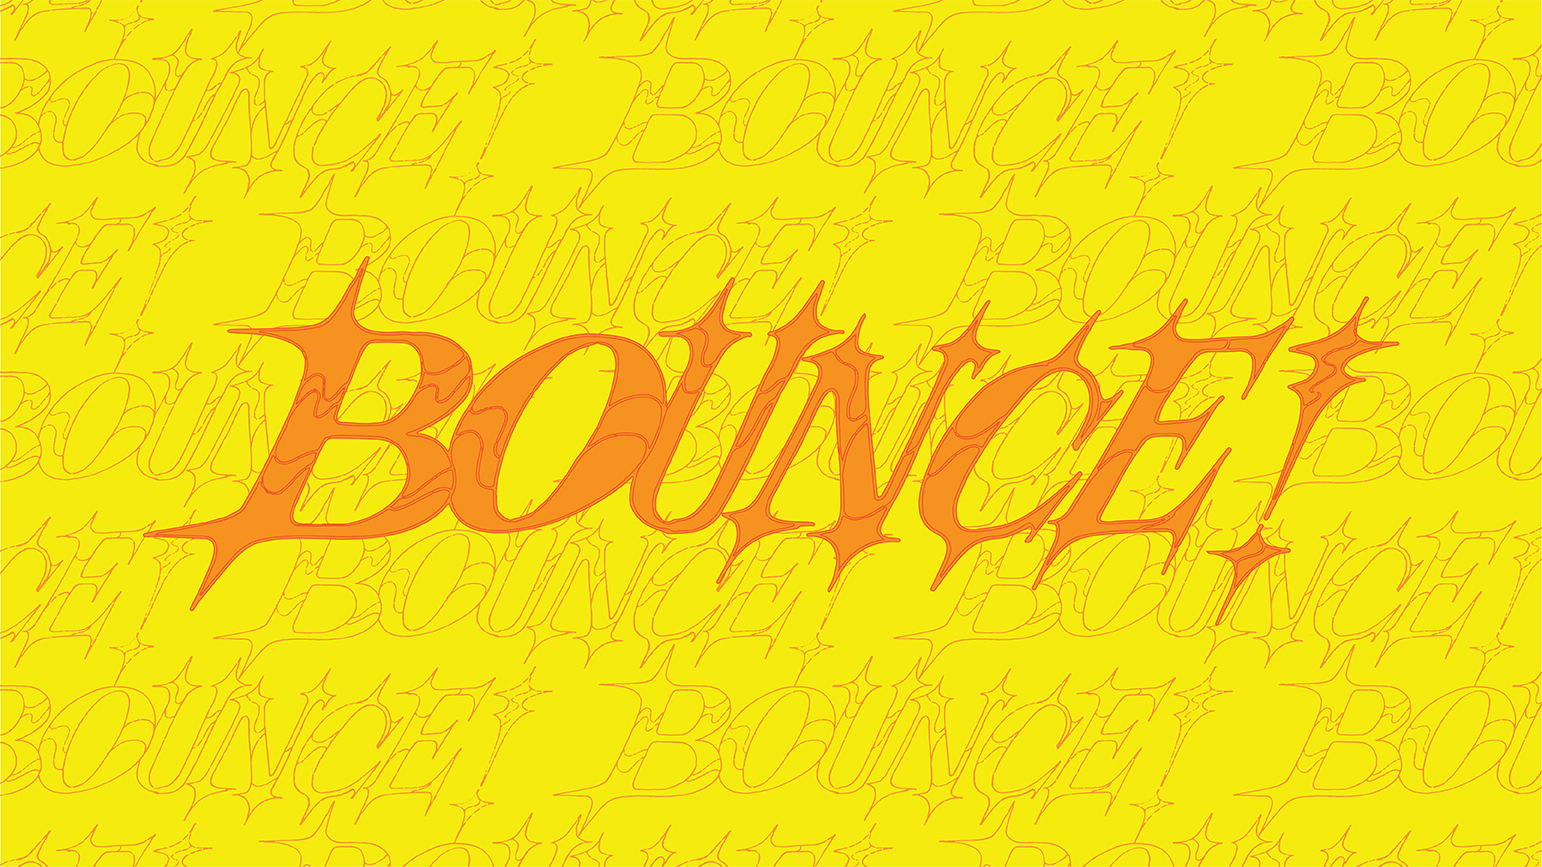 The word "BOUNCE!" in capital letters in organ against a yellow background with the work "BOUNCE!" written repeatedly in a smaller size in an orange outline